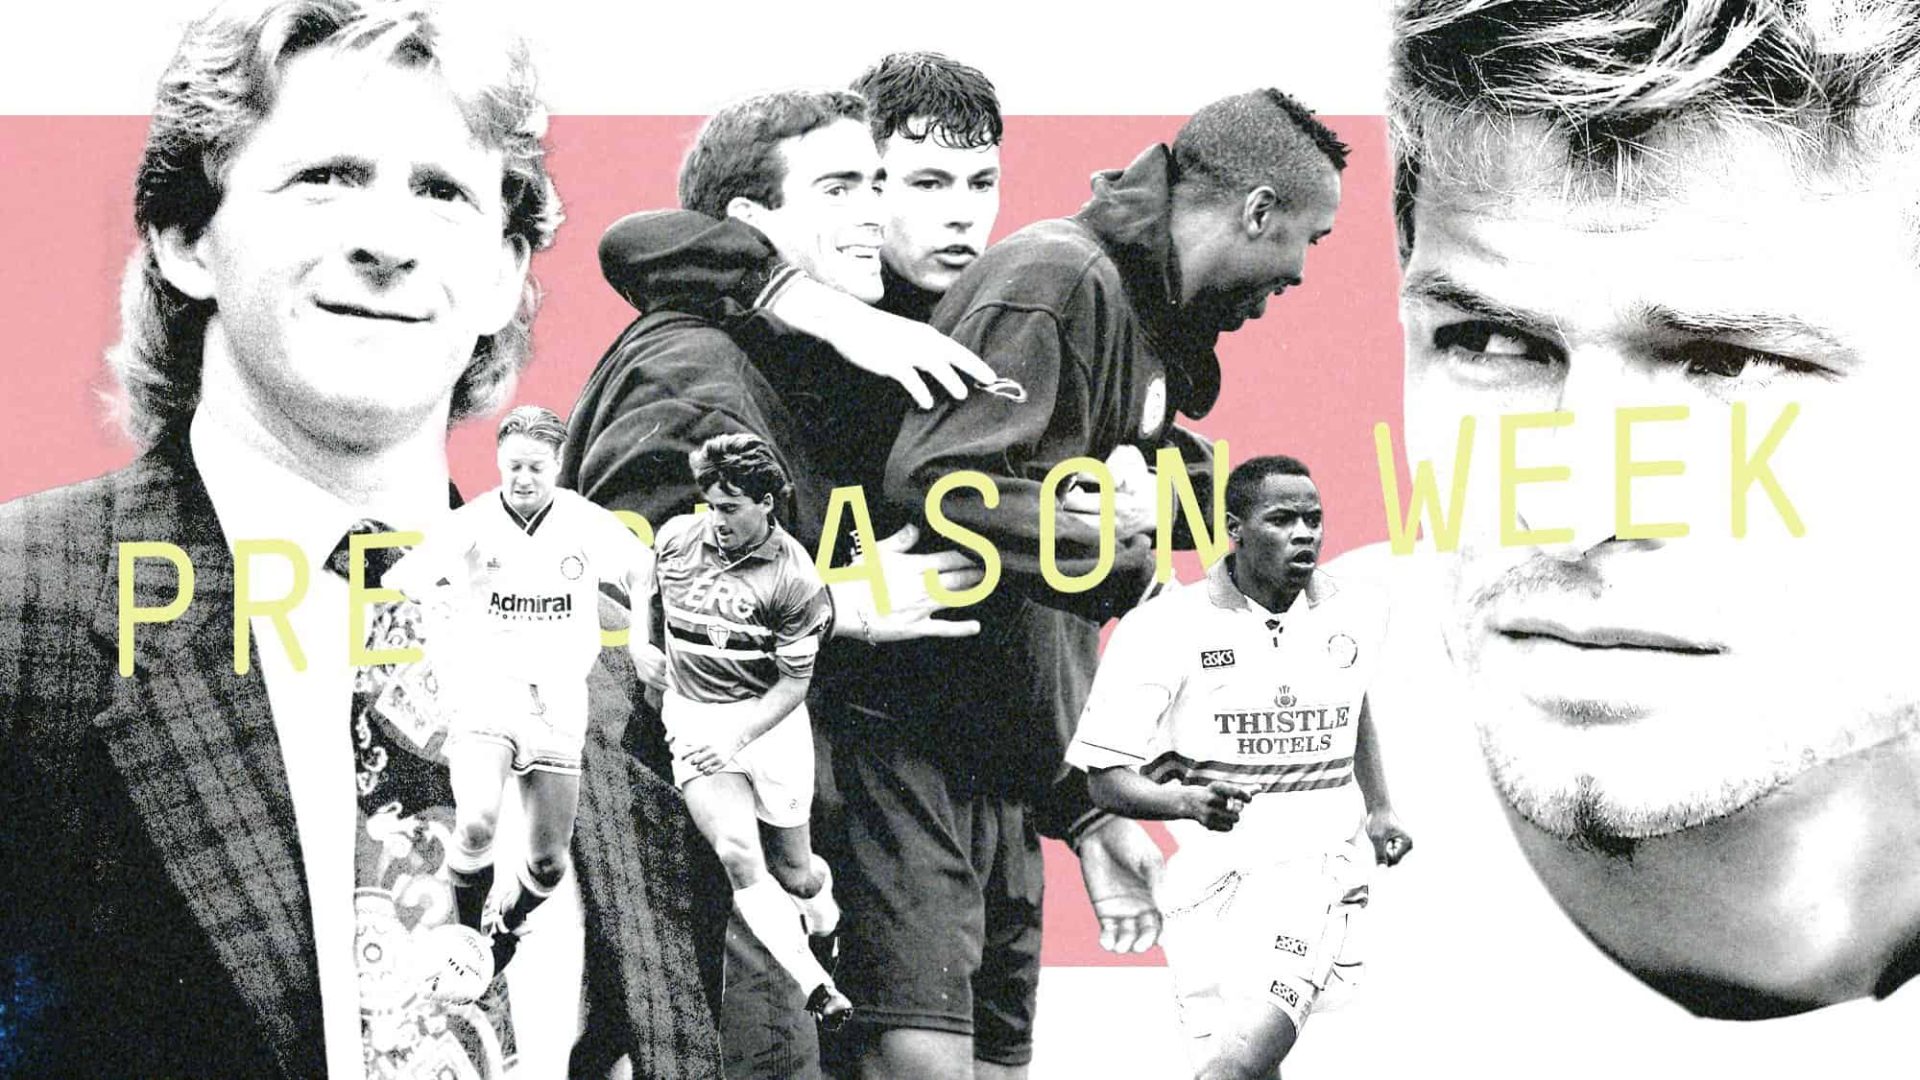 A collage of Leeds players including Strachan, Batty, Masinga, Harte and Beckham — not that one